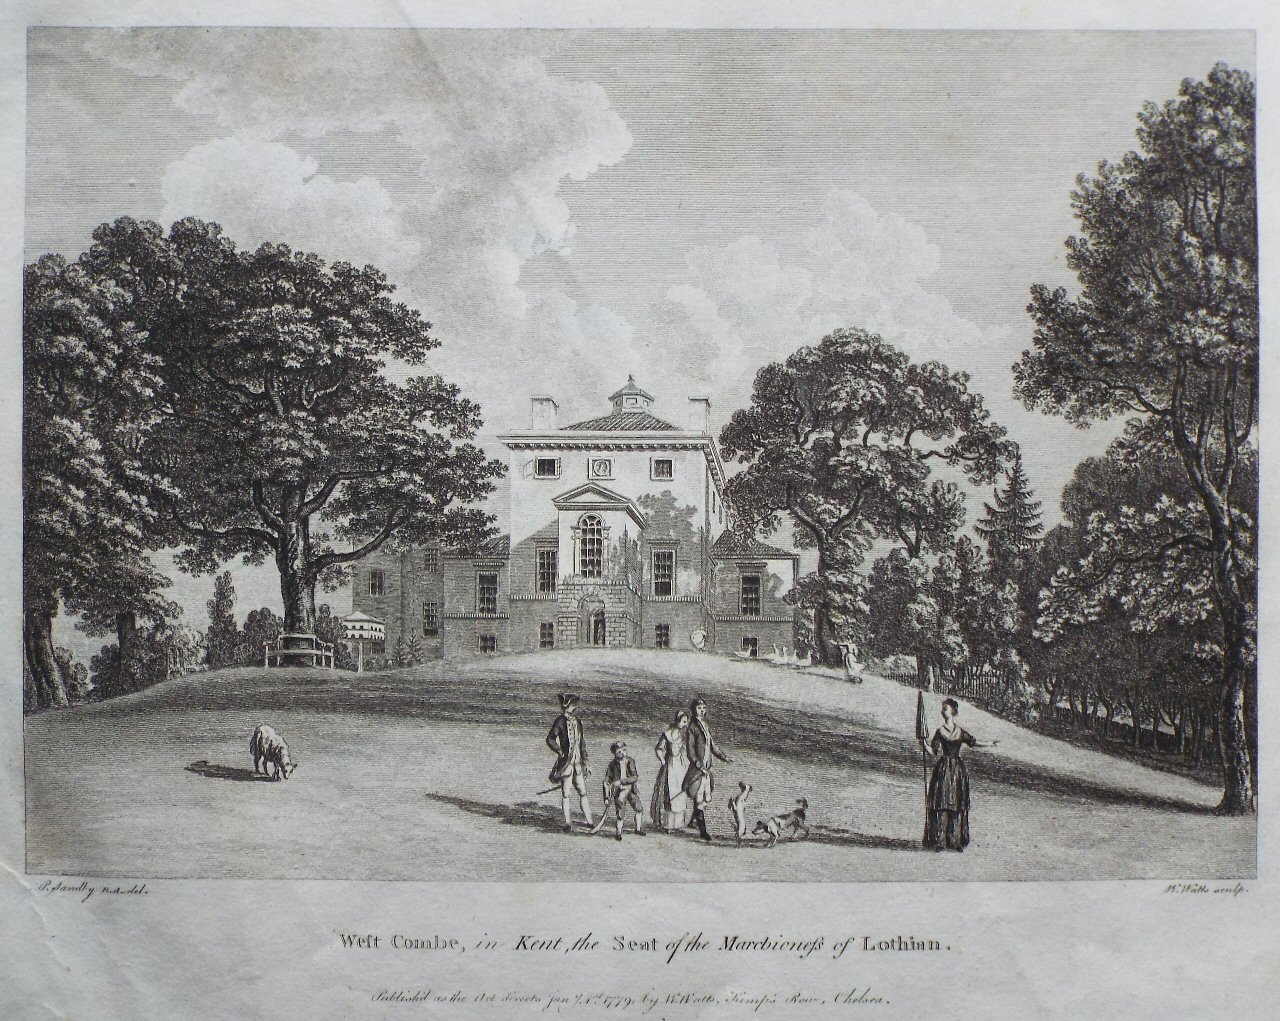 Print - West Combe, in Kent, the Seat of the Marchioness of Lothian - Watts